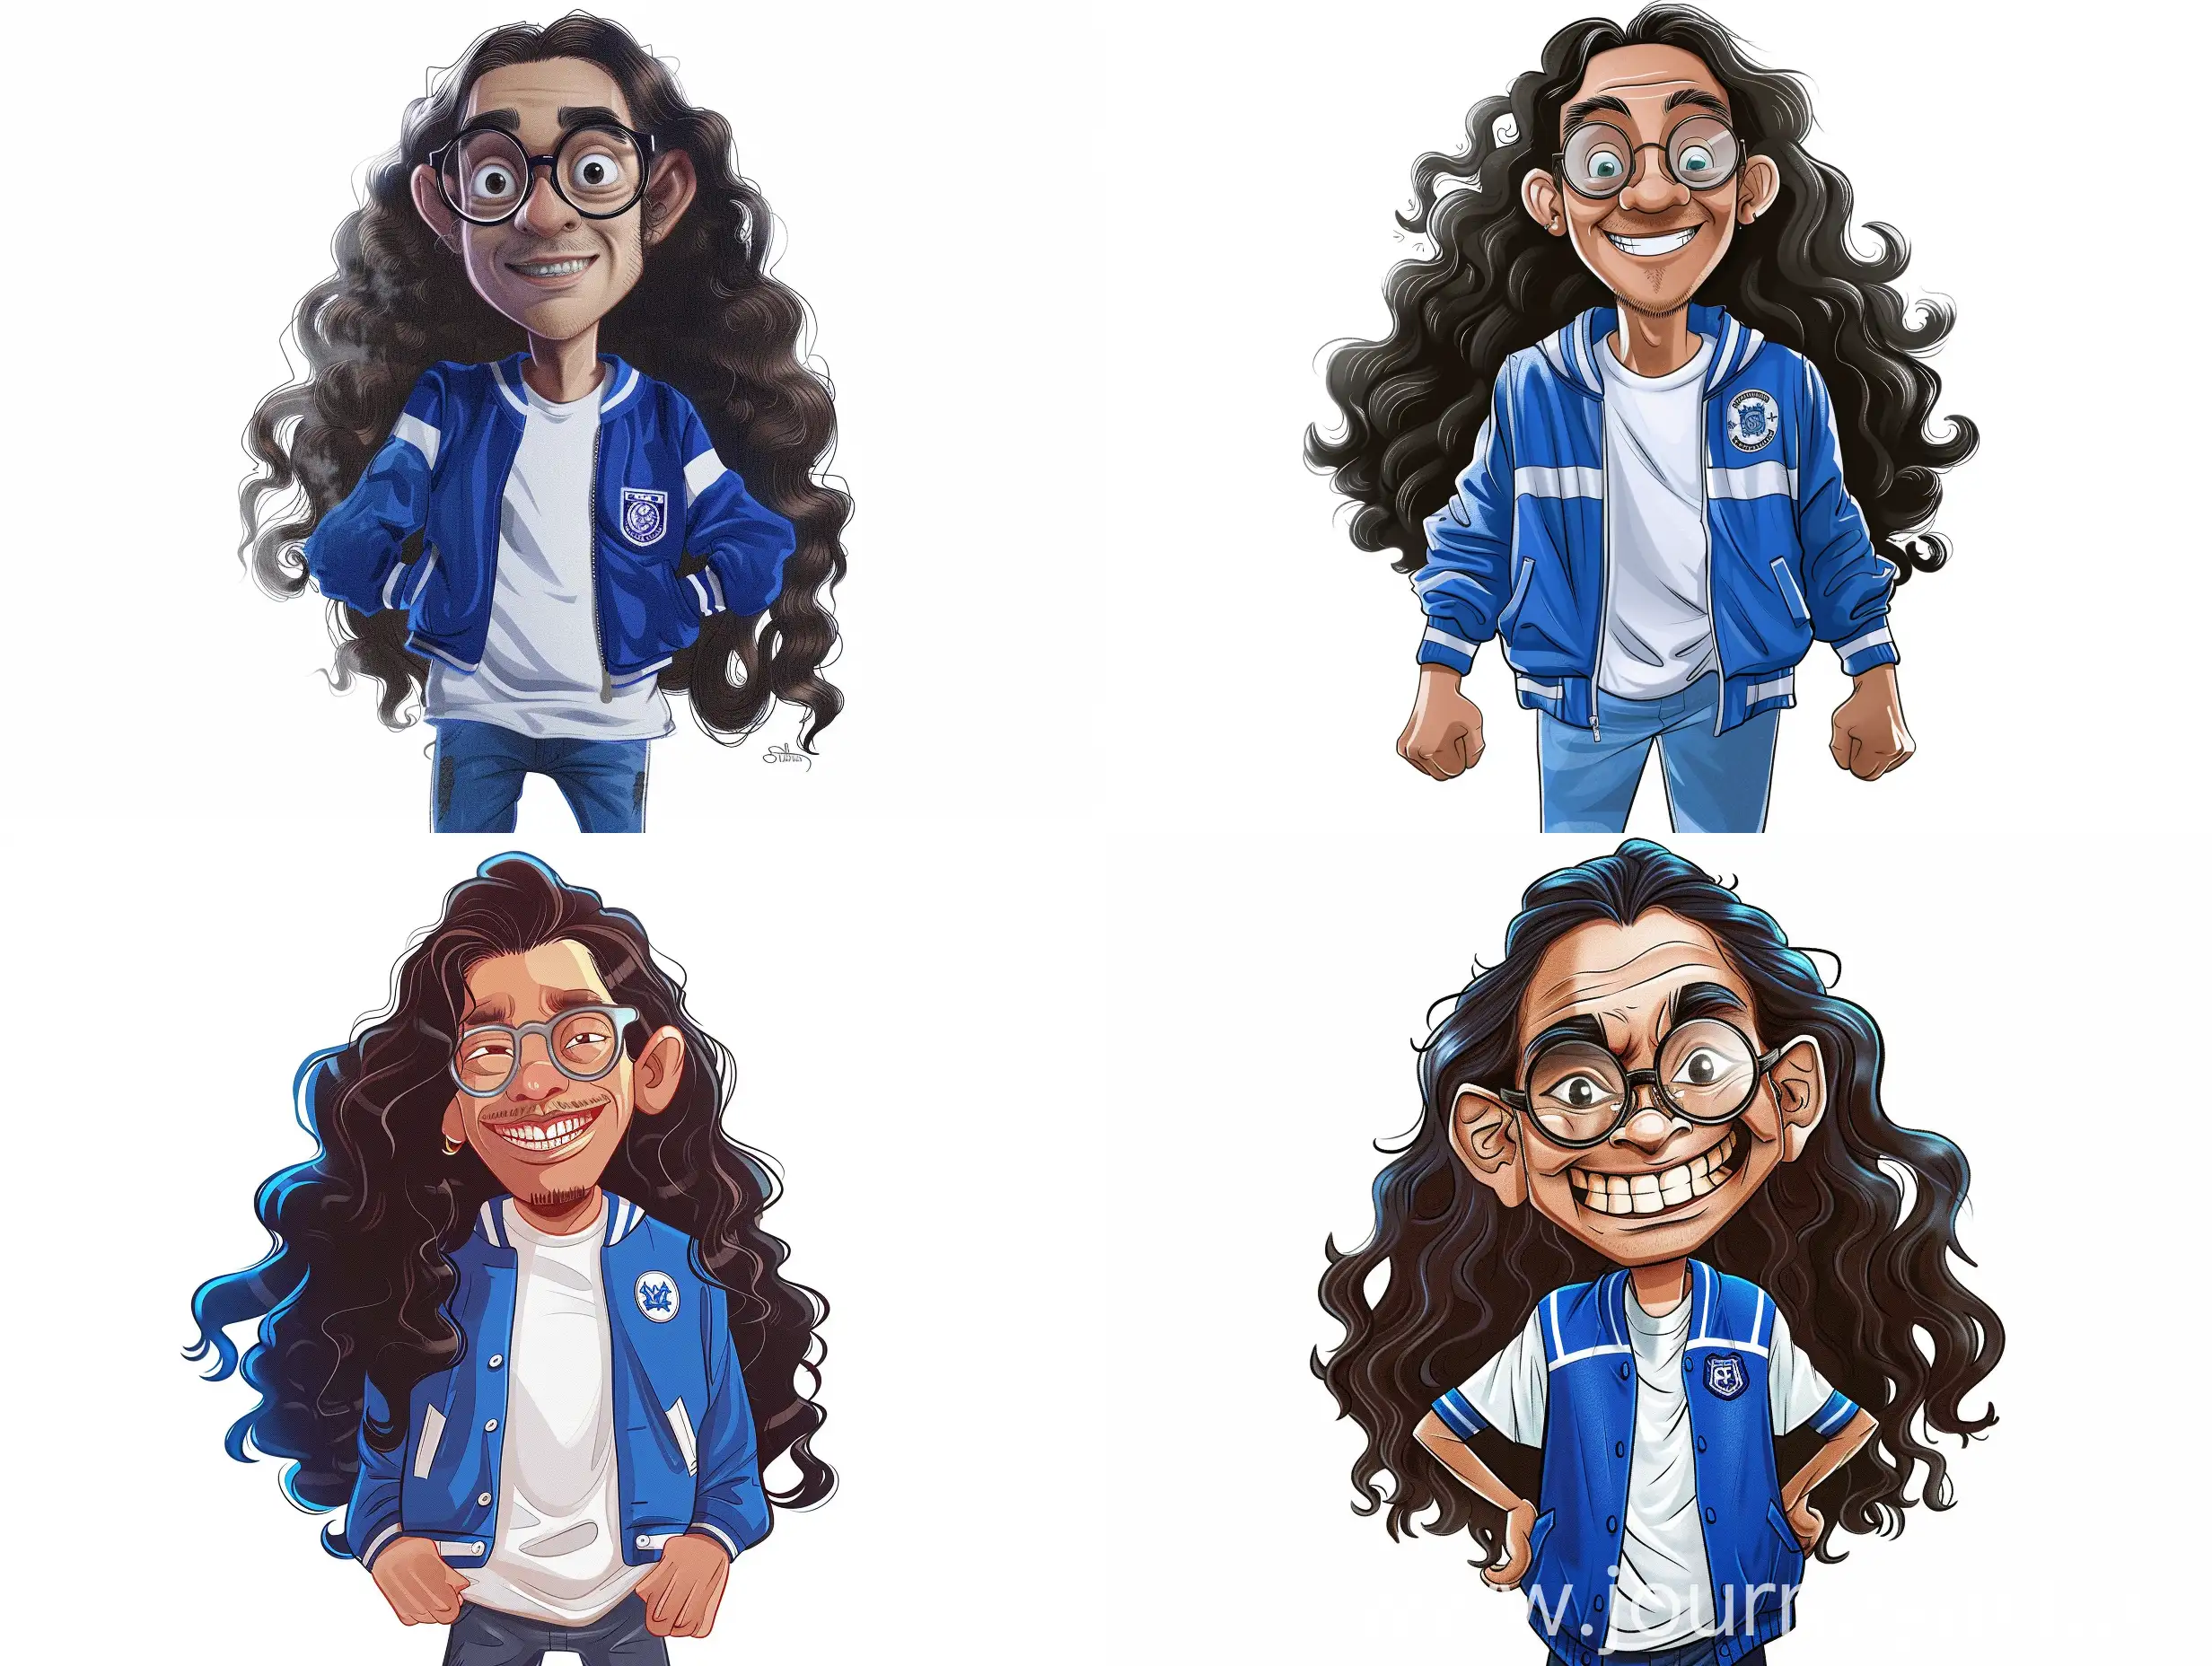 Full body A caricature of an indonesian man wearing blue varsity jacket, white t-shirt, big head, glasses, very long wavy hair, Front view happy pose